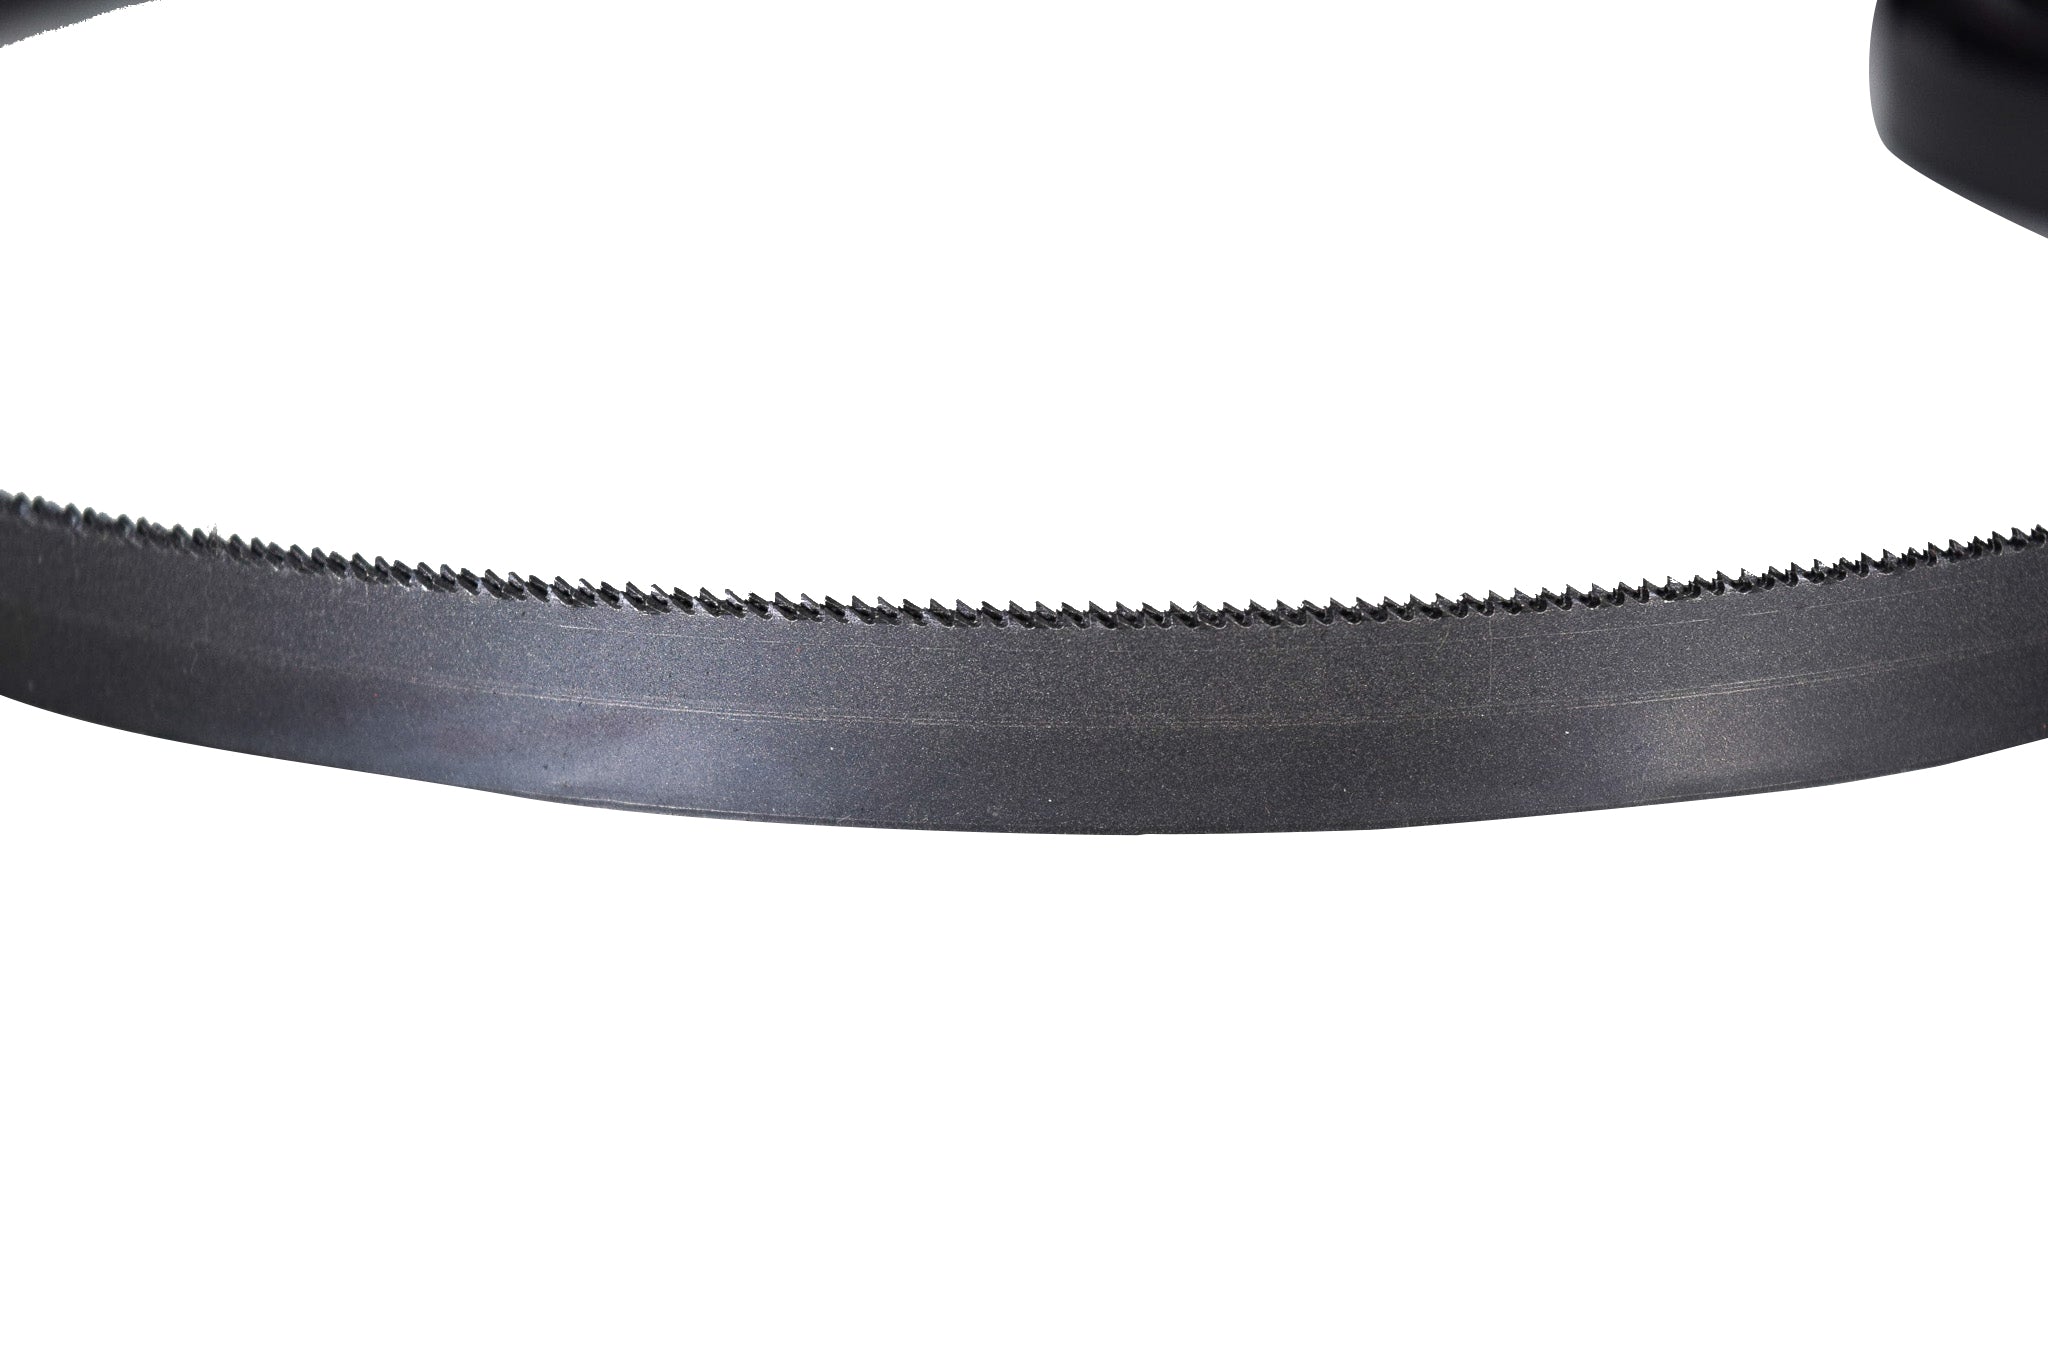 Milwaukee 48-39-0529 35-3/8 in. 18 TPI Compact Portable Band Saw Blade 3-Pack